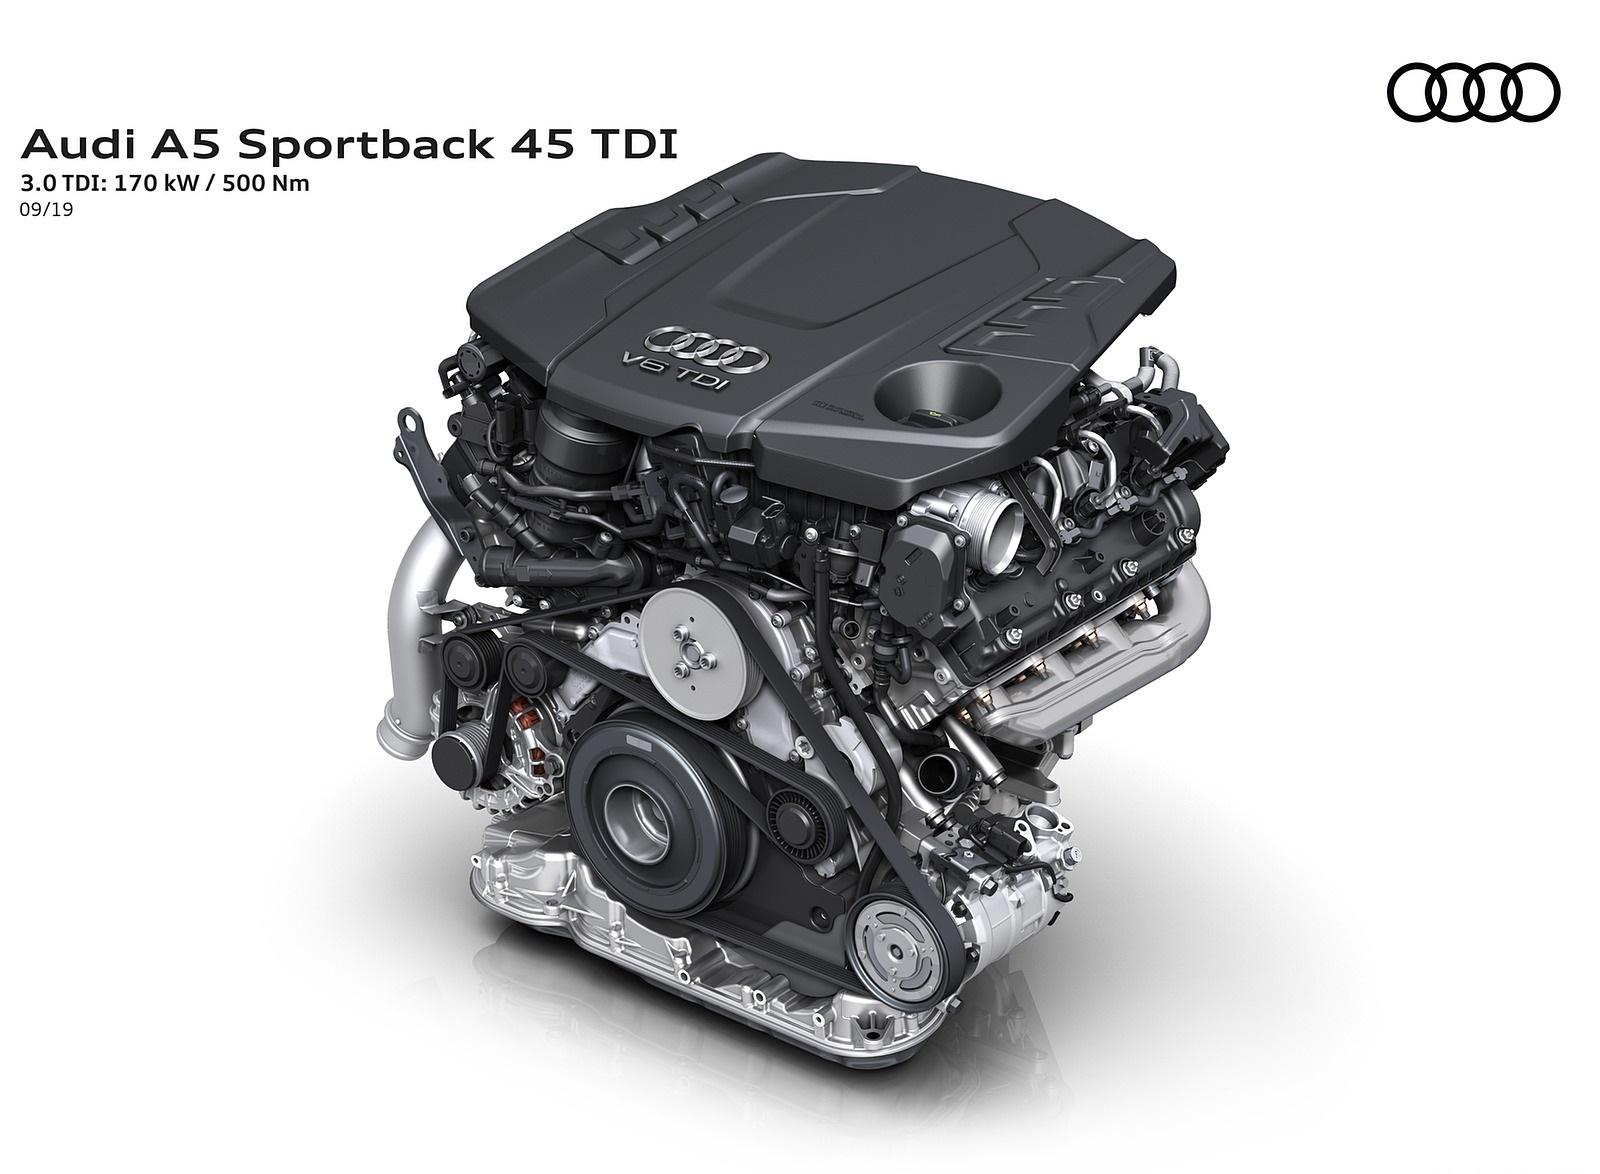 2020 Audi A5 Sportback 3.0 TDI: 170 kW / 500 Nm Engine Wallpapers #27 of 31